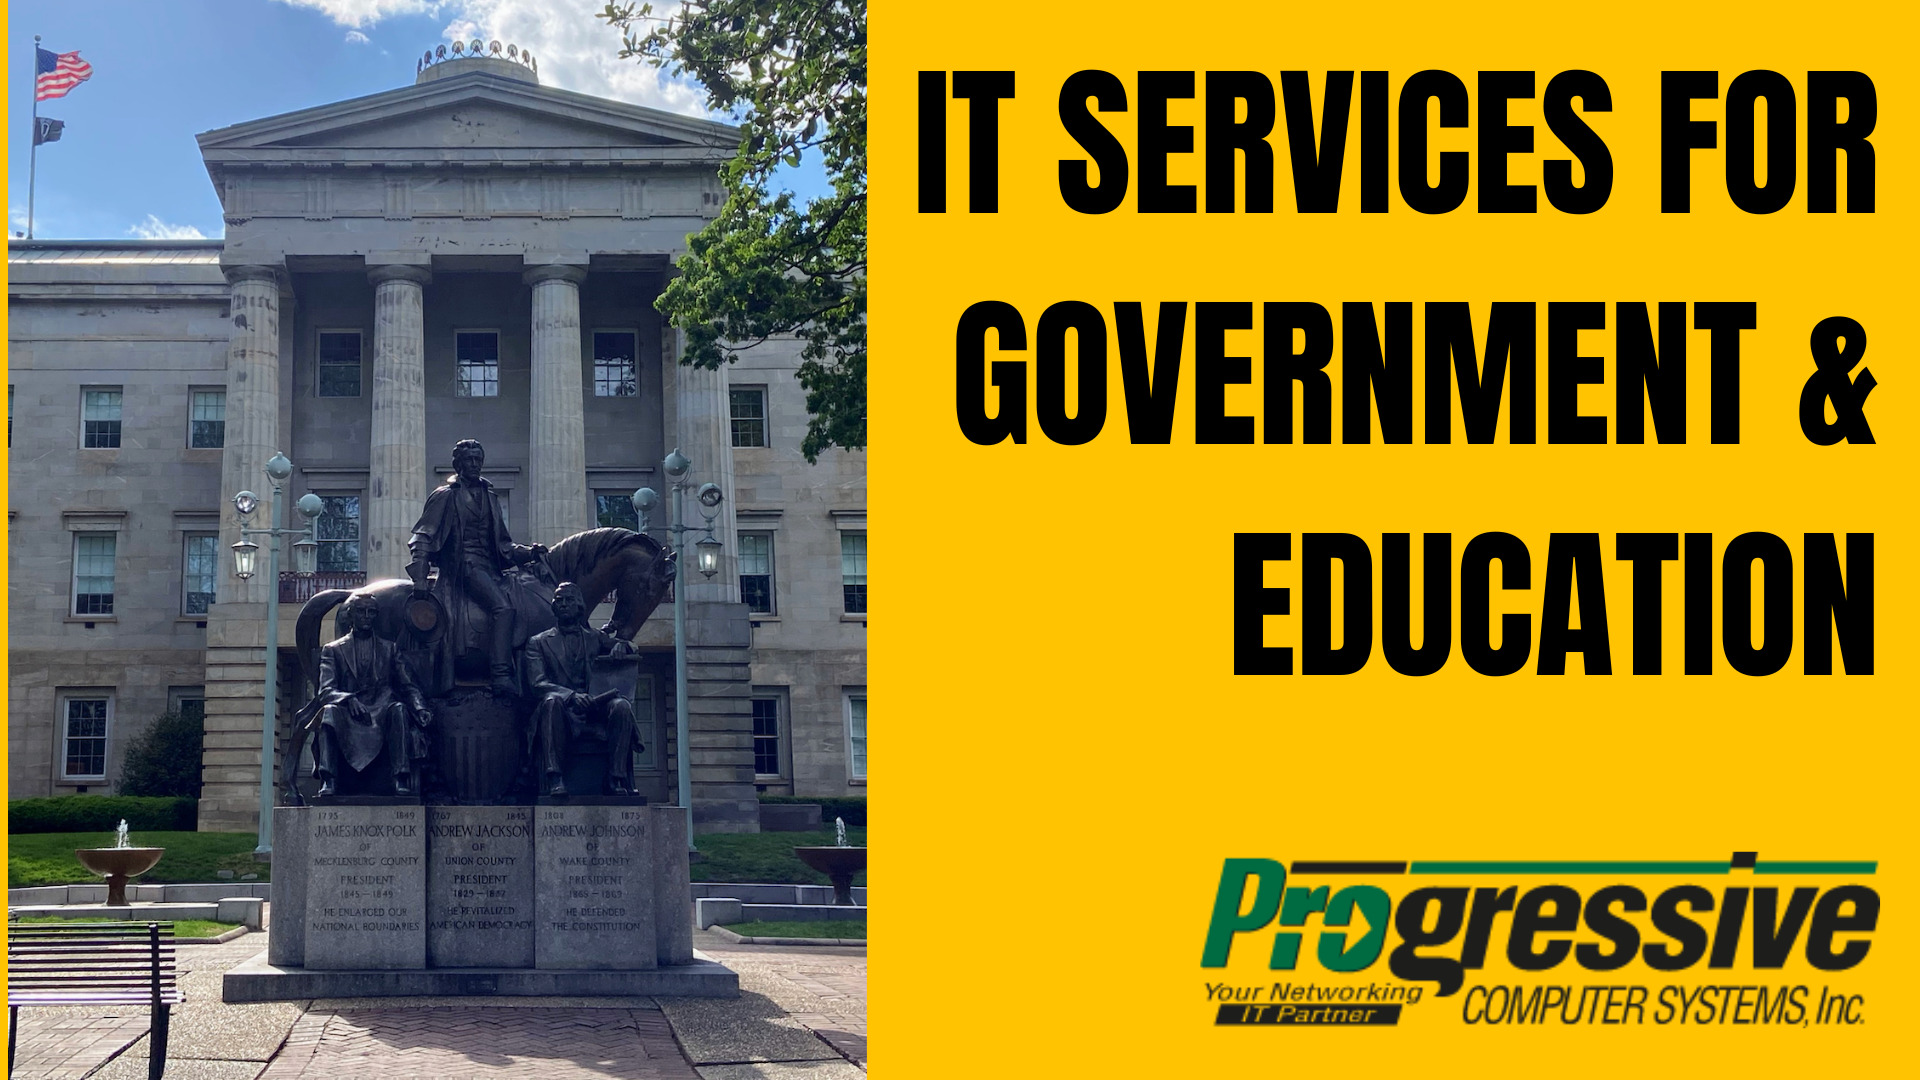 IT Services For Government & Education